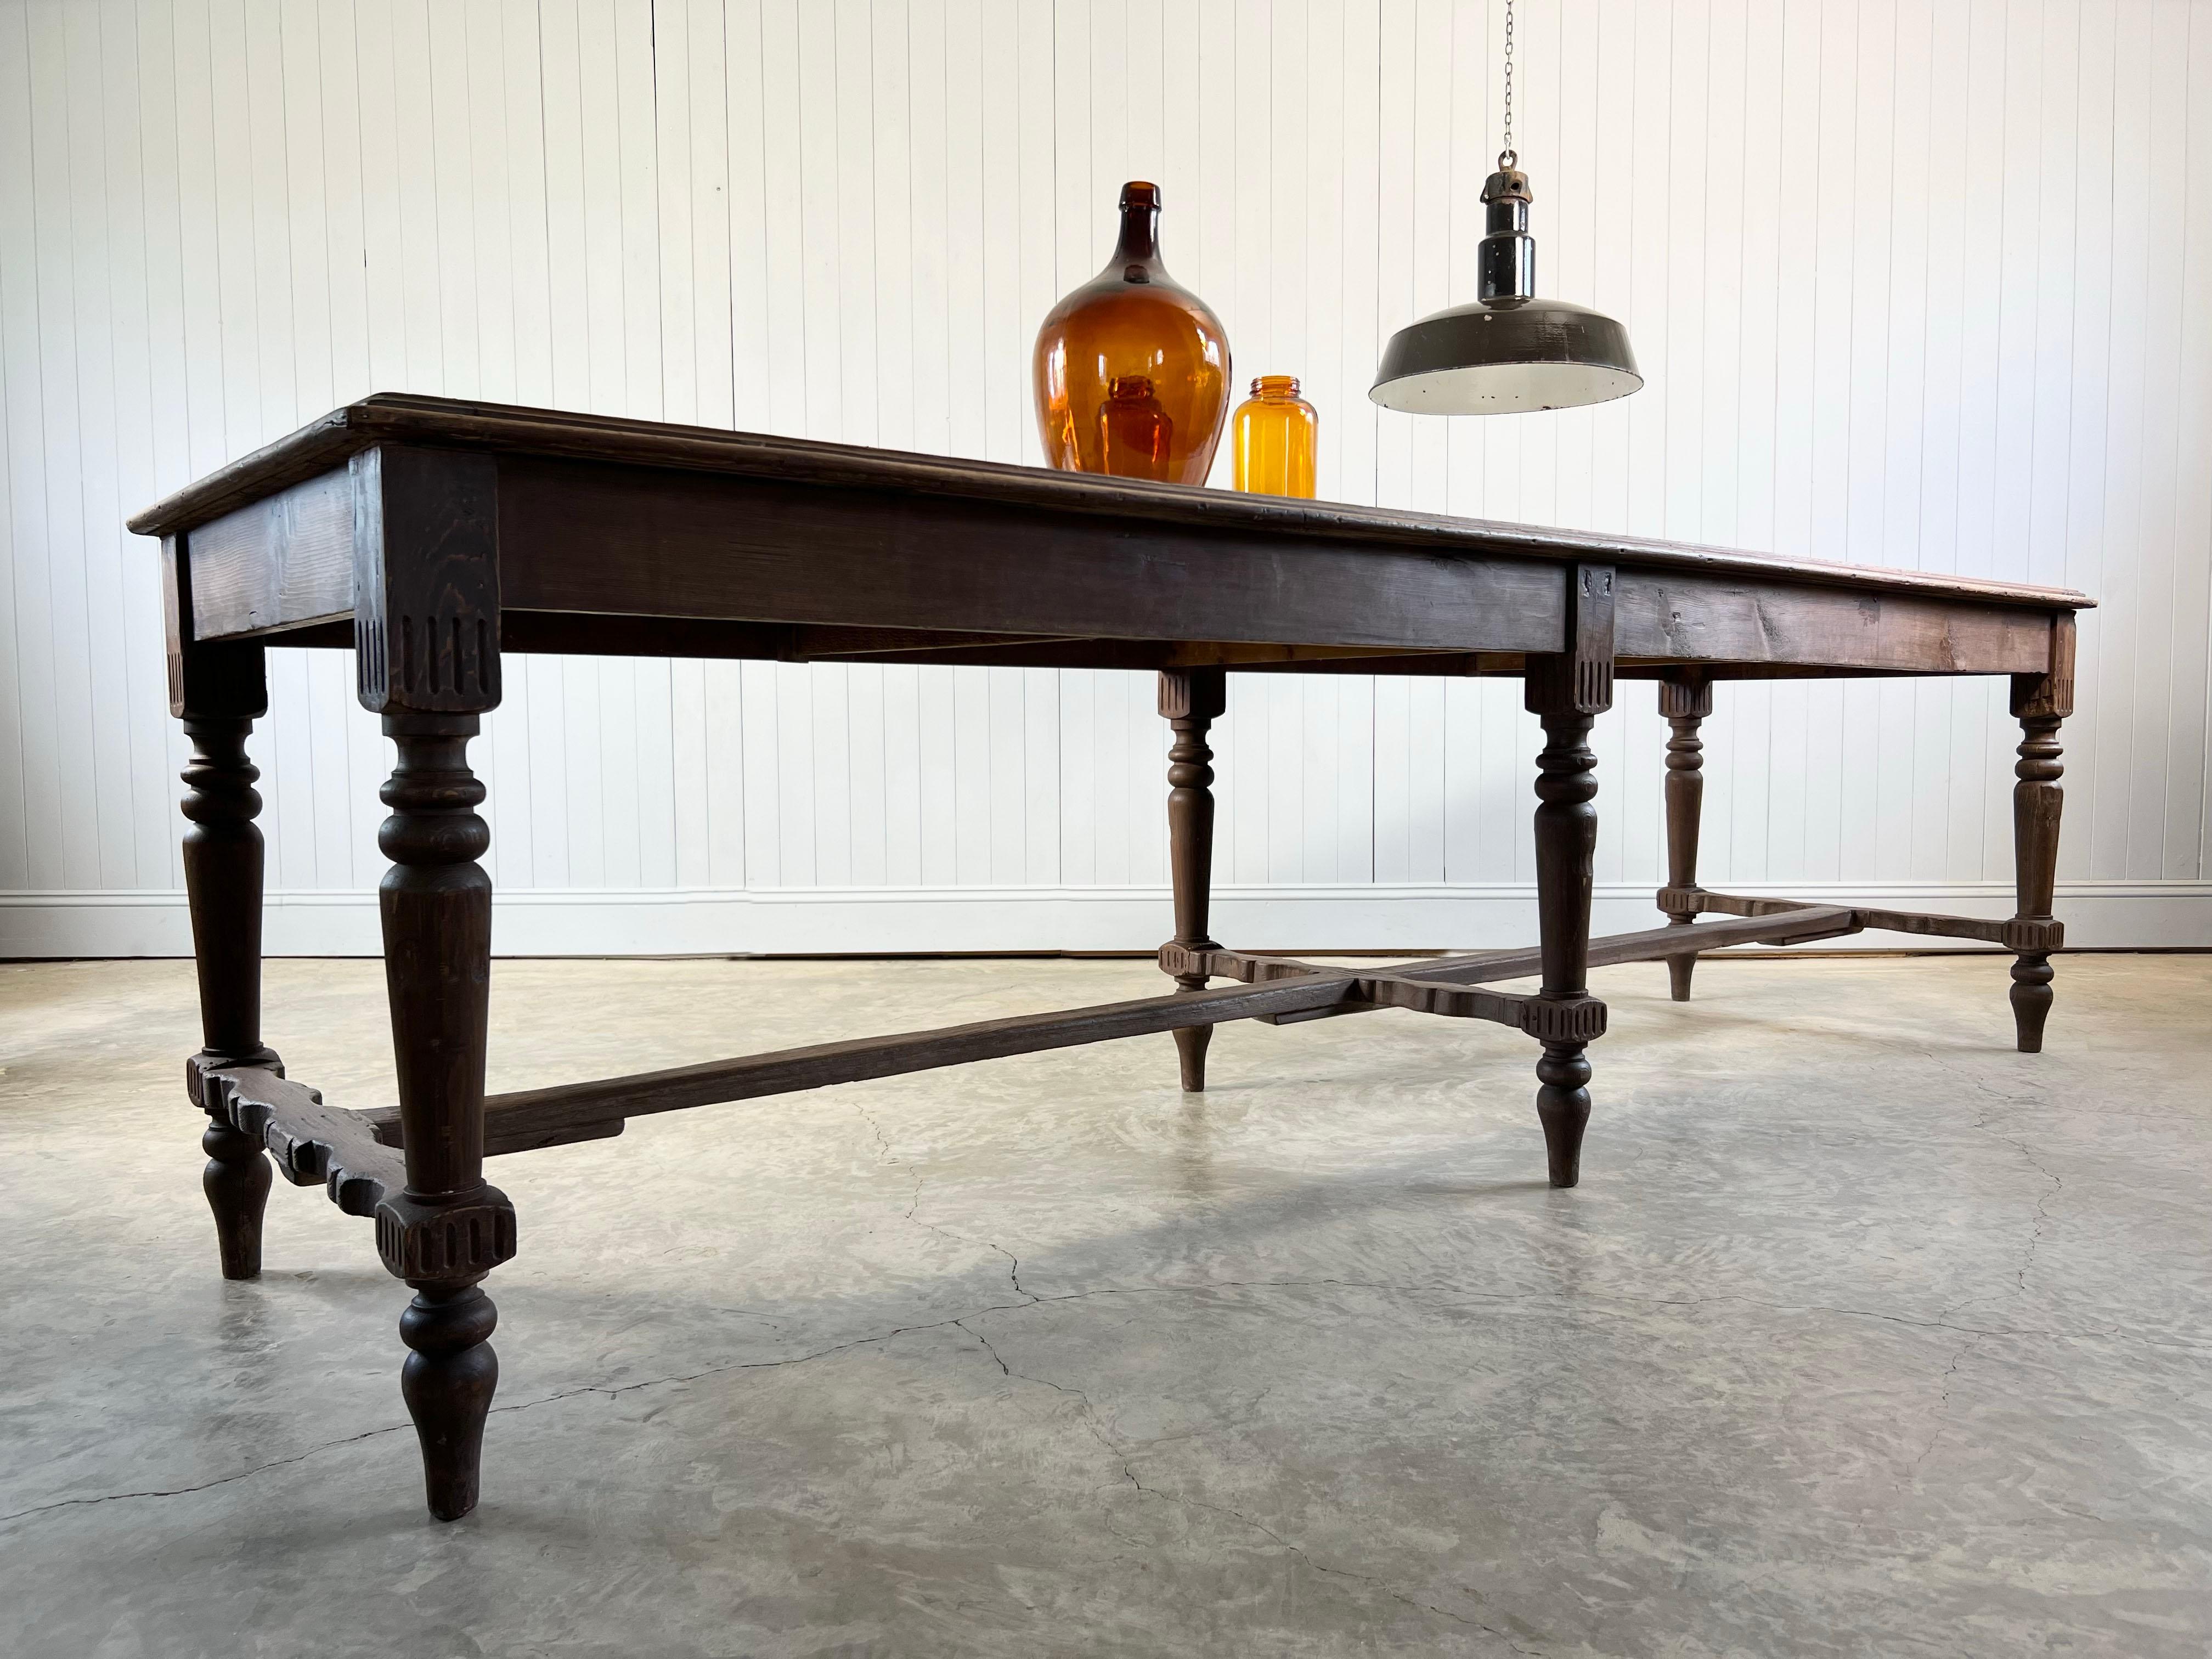 Late 19th Century this French table would have been used for displaying delicious pastries and breads.  

Lovely proportions and contrasting materials with the marble insert and the naturally worn pine frame of this large table.

The marble, which